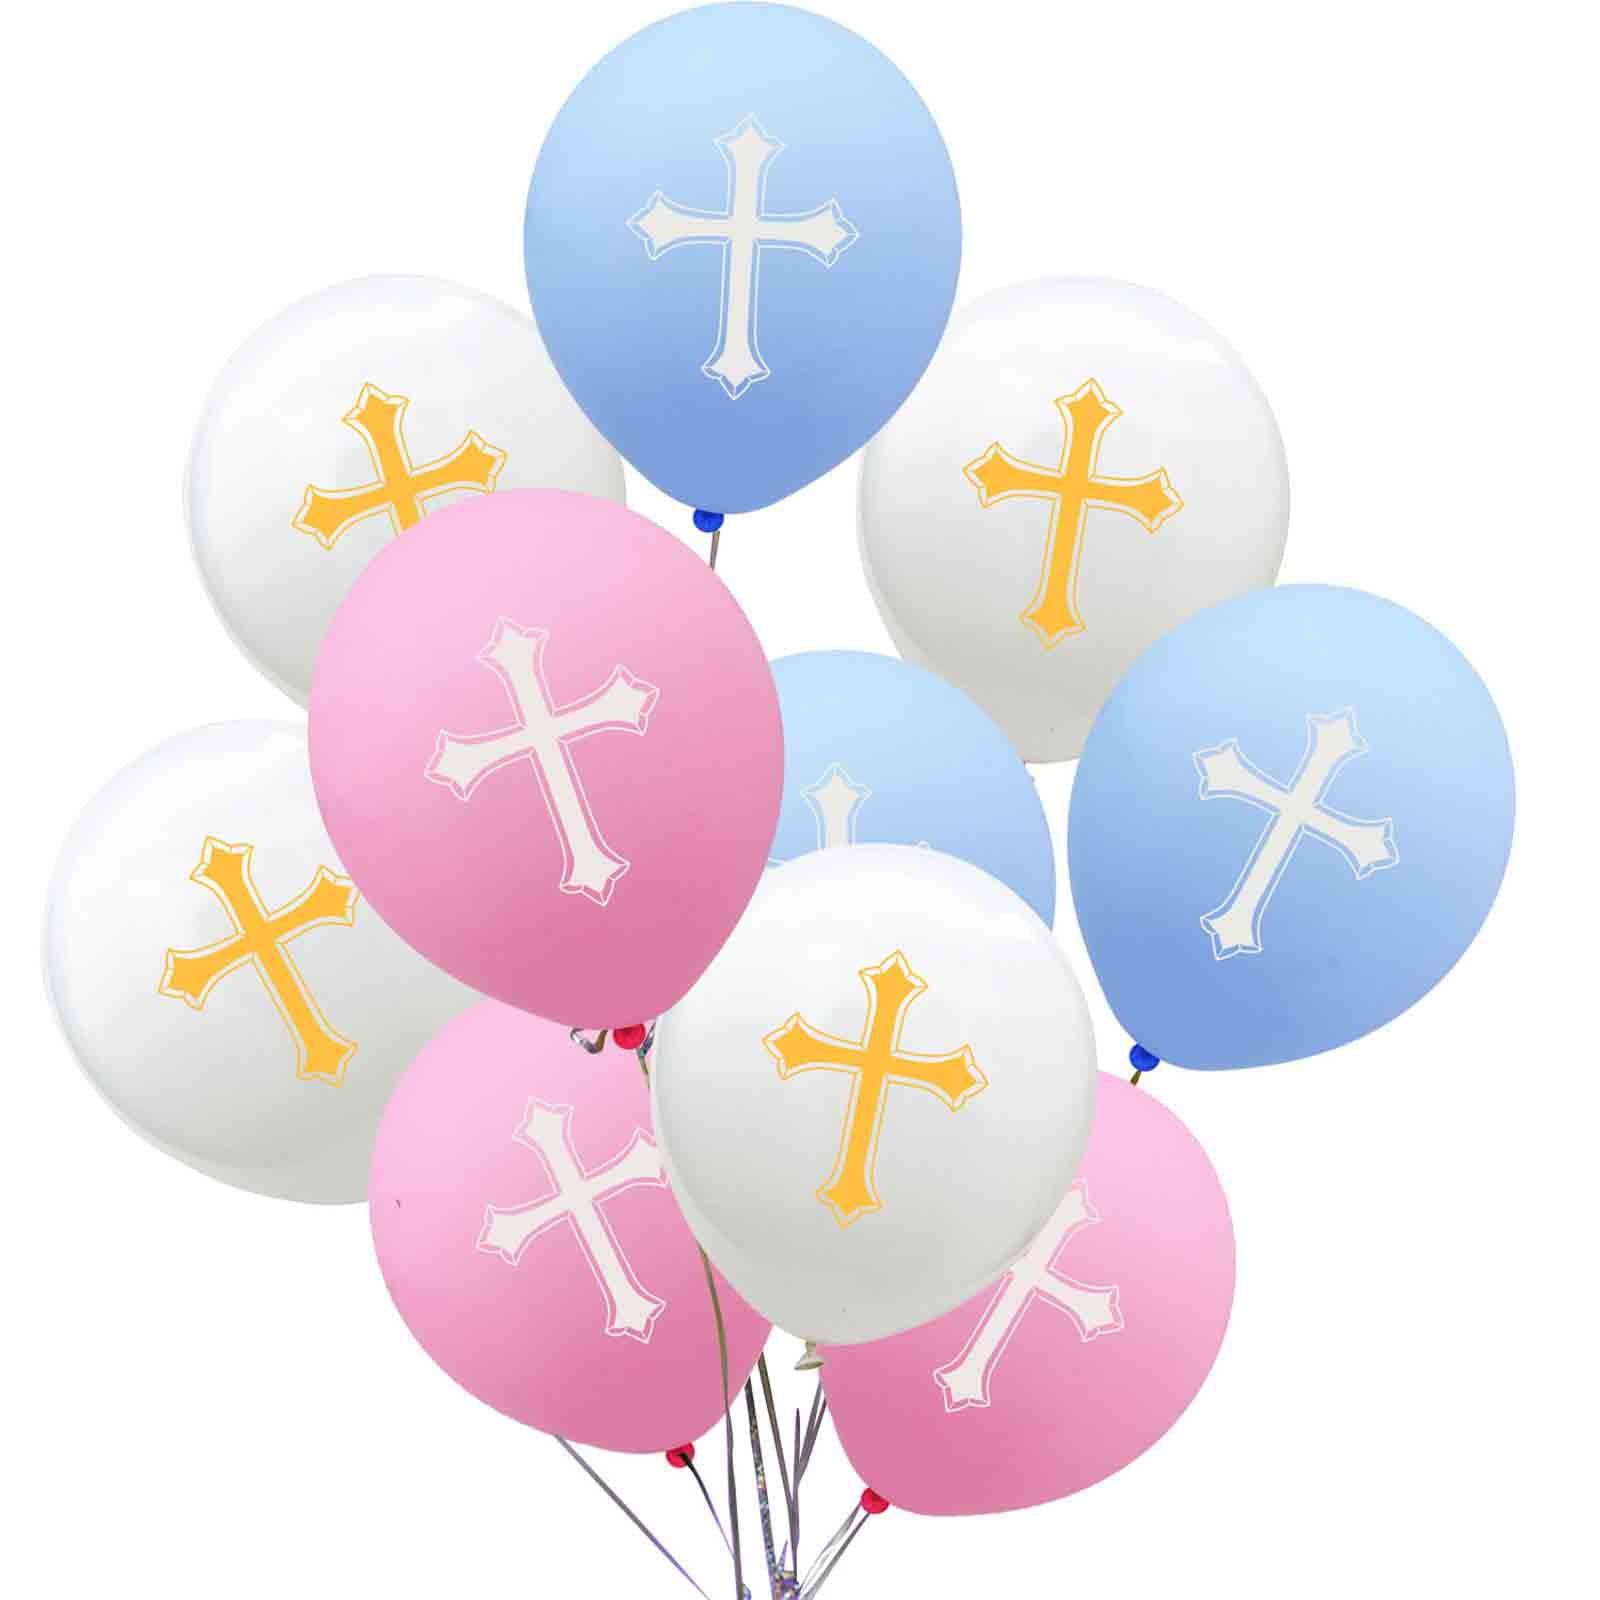 Details about   Holy Communion Bless Cross Easter Party Latex Confetti Balloon Foil Balloons 